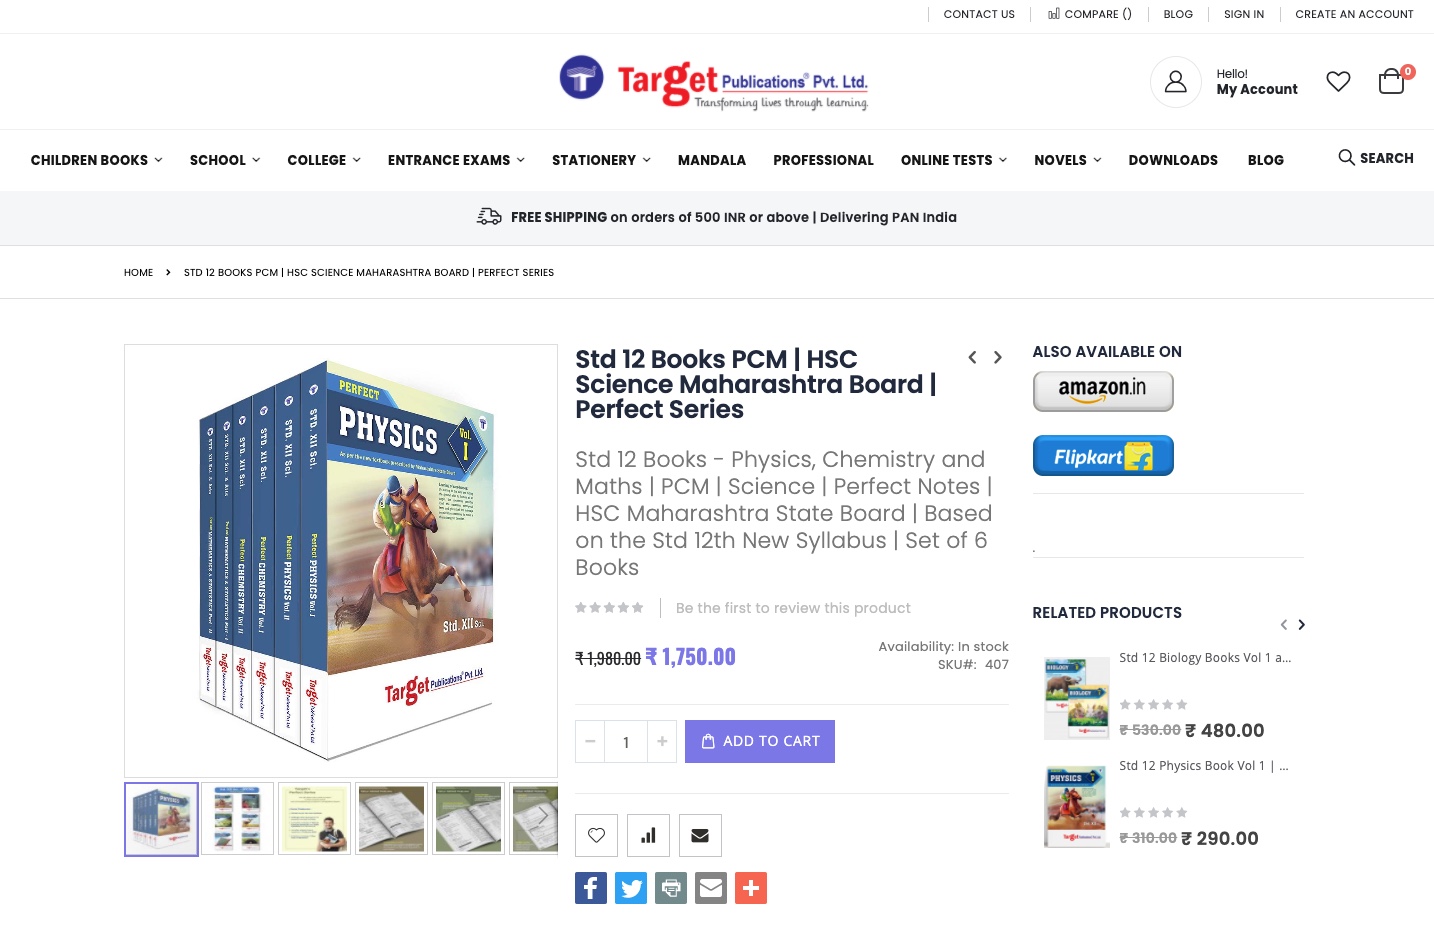 Product Detail Page Screenshot - Target Publications